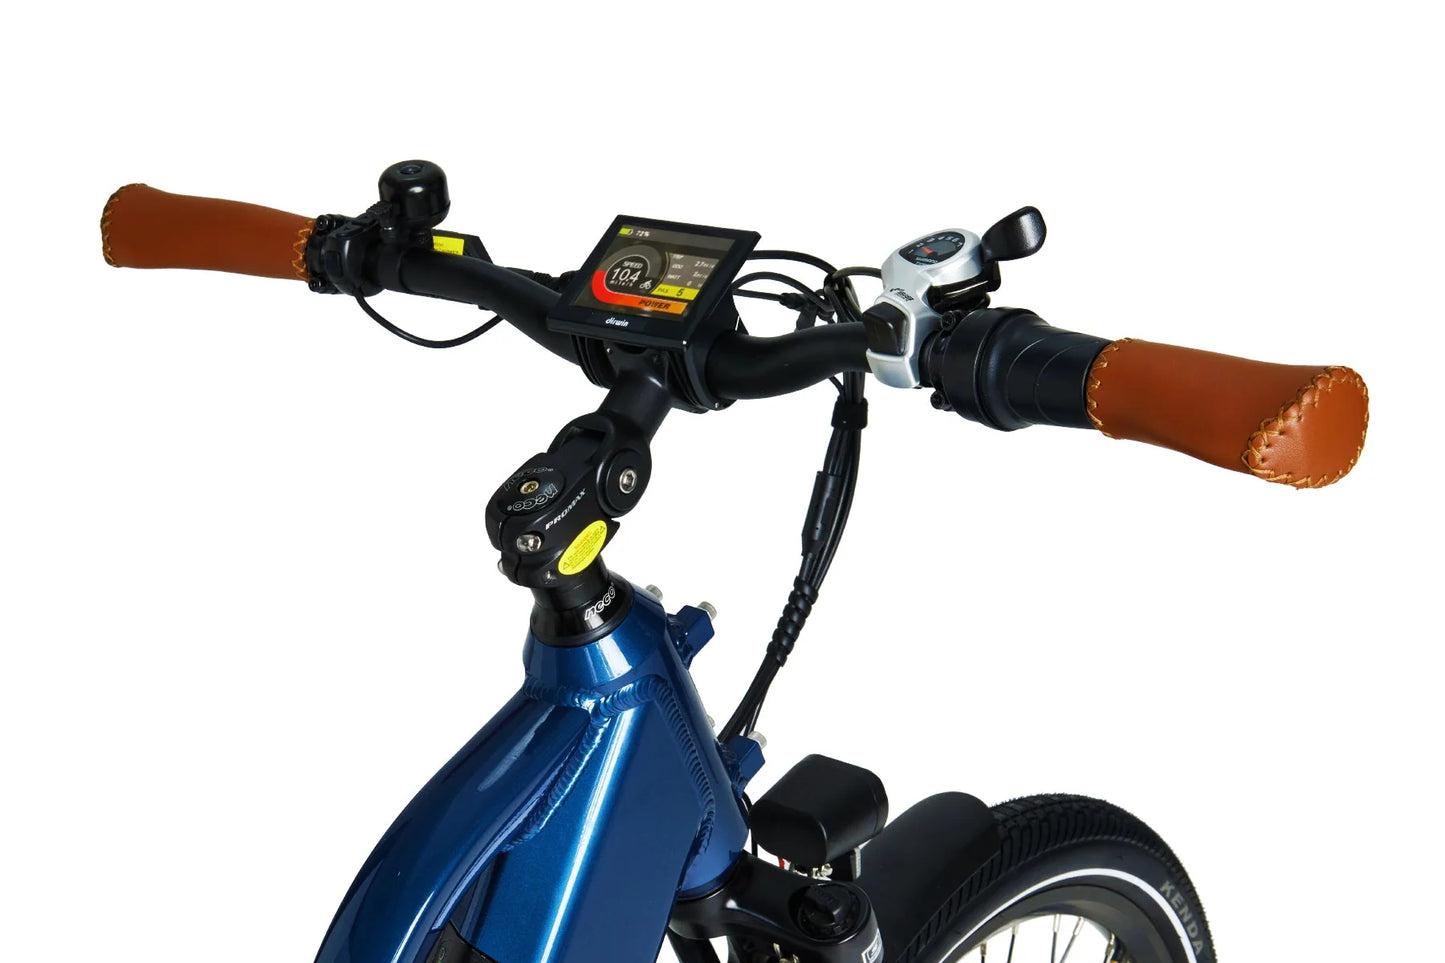 Dirwin Pacer Commuter 500W 48V Electric Bike